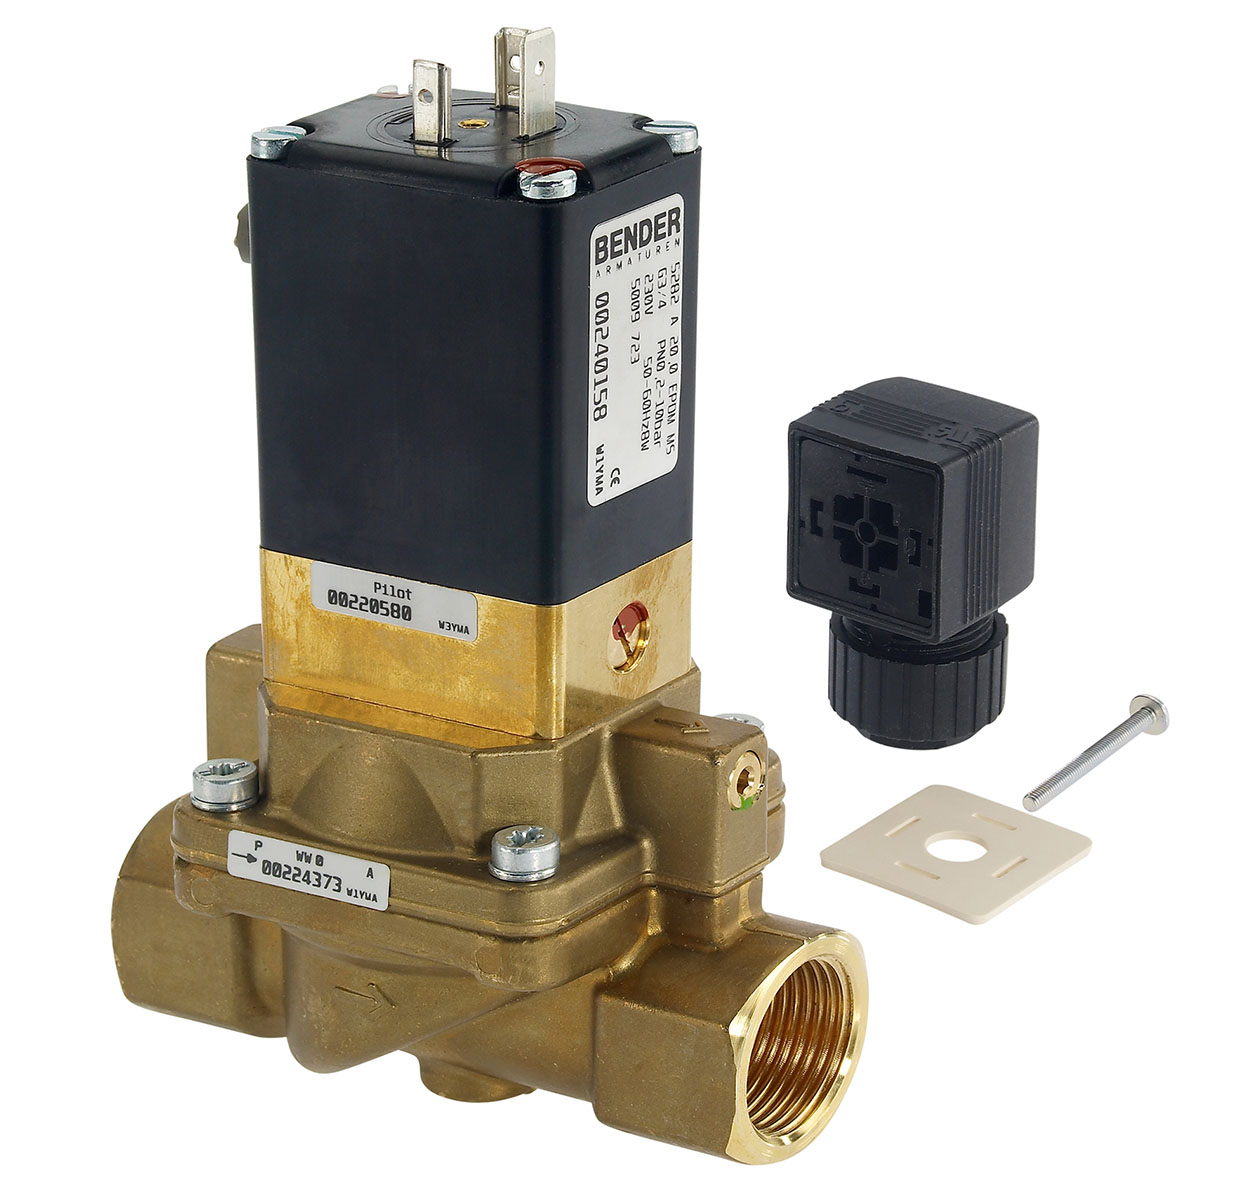 5009727 - 2/2 way solenoid valve normally closed for lightly soiled fluids Type 7; female thread